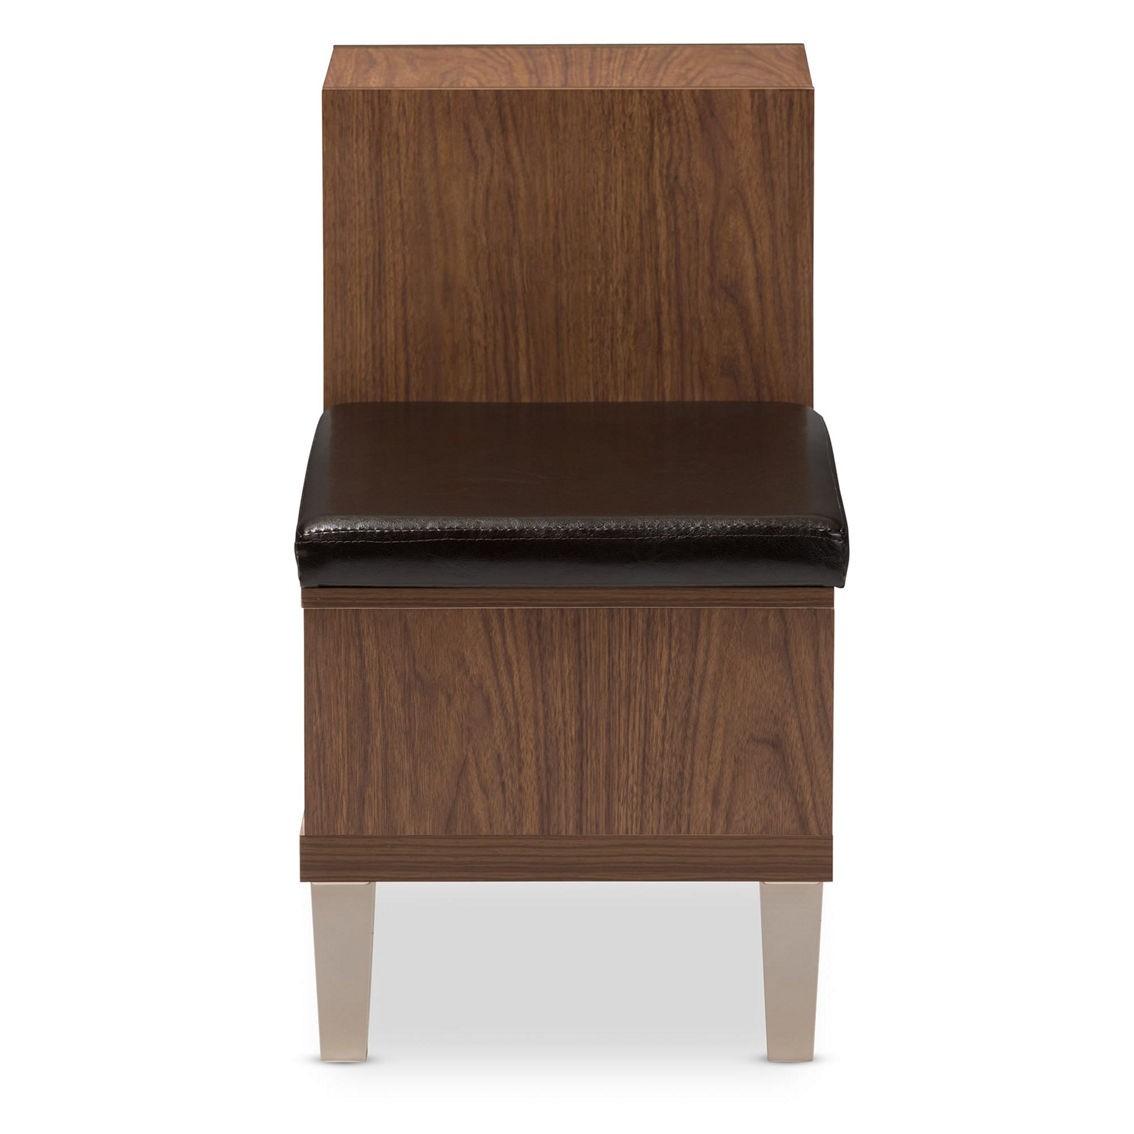 Baxton Studio Arielle Walnut Wood 3-Drawer Shoe Storage With Faux Leather Bench - Image 3 of 5